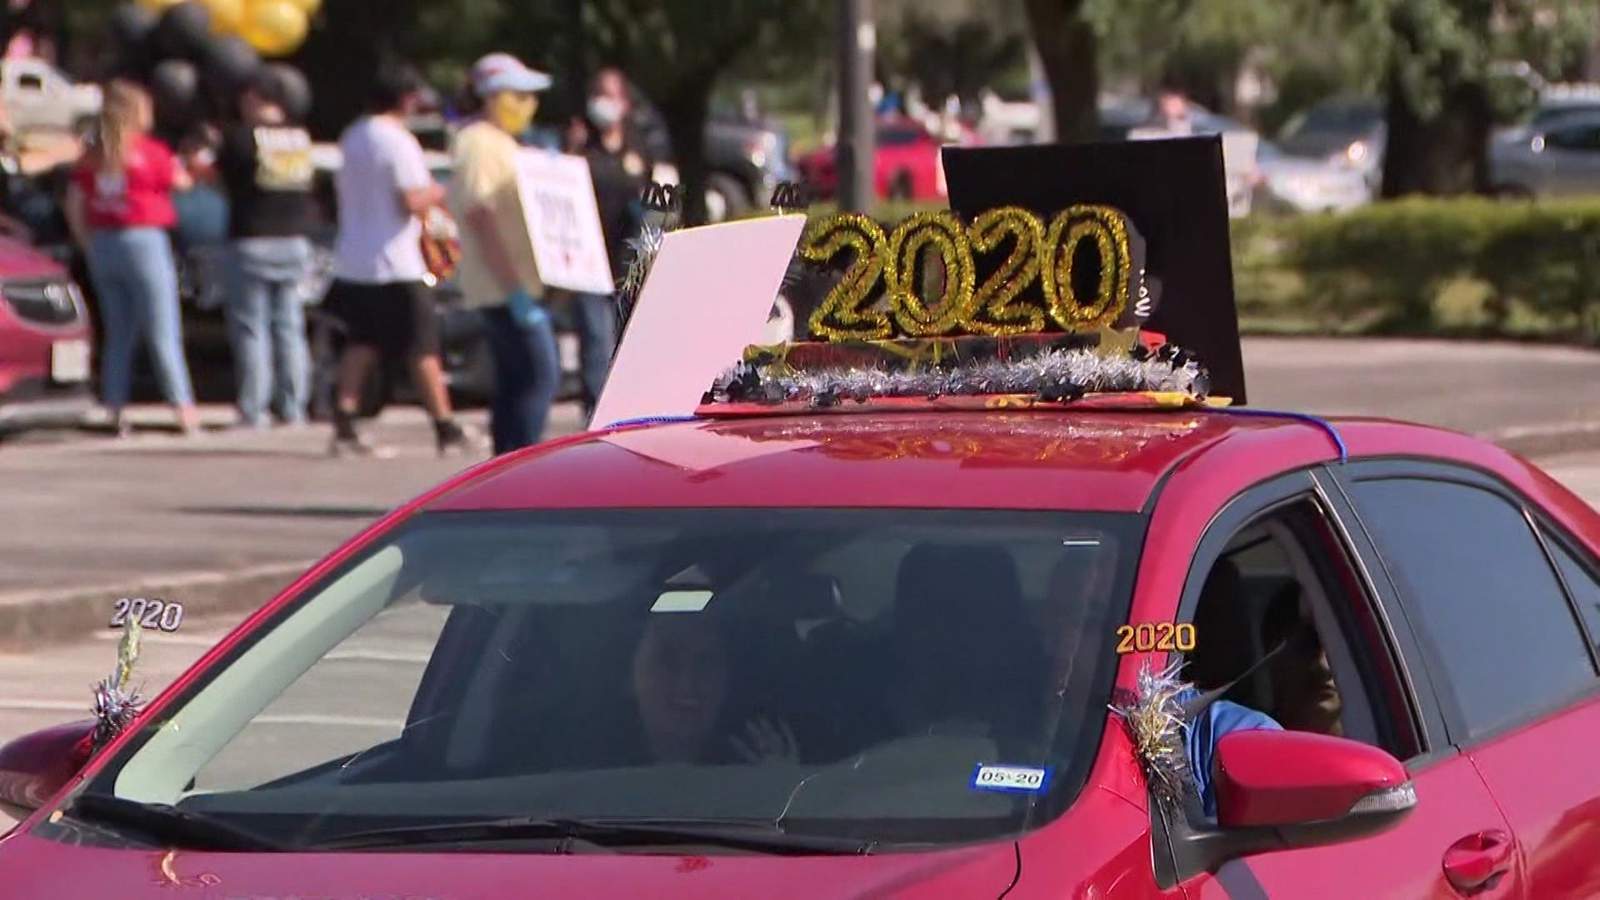 Wunsche HS seniors get drive-thru caps and gowns and car parade to celebrate graduation